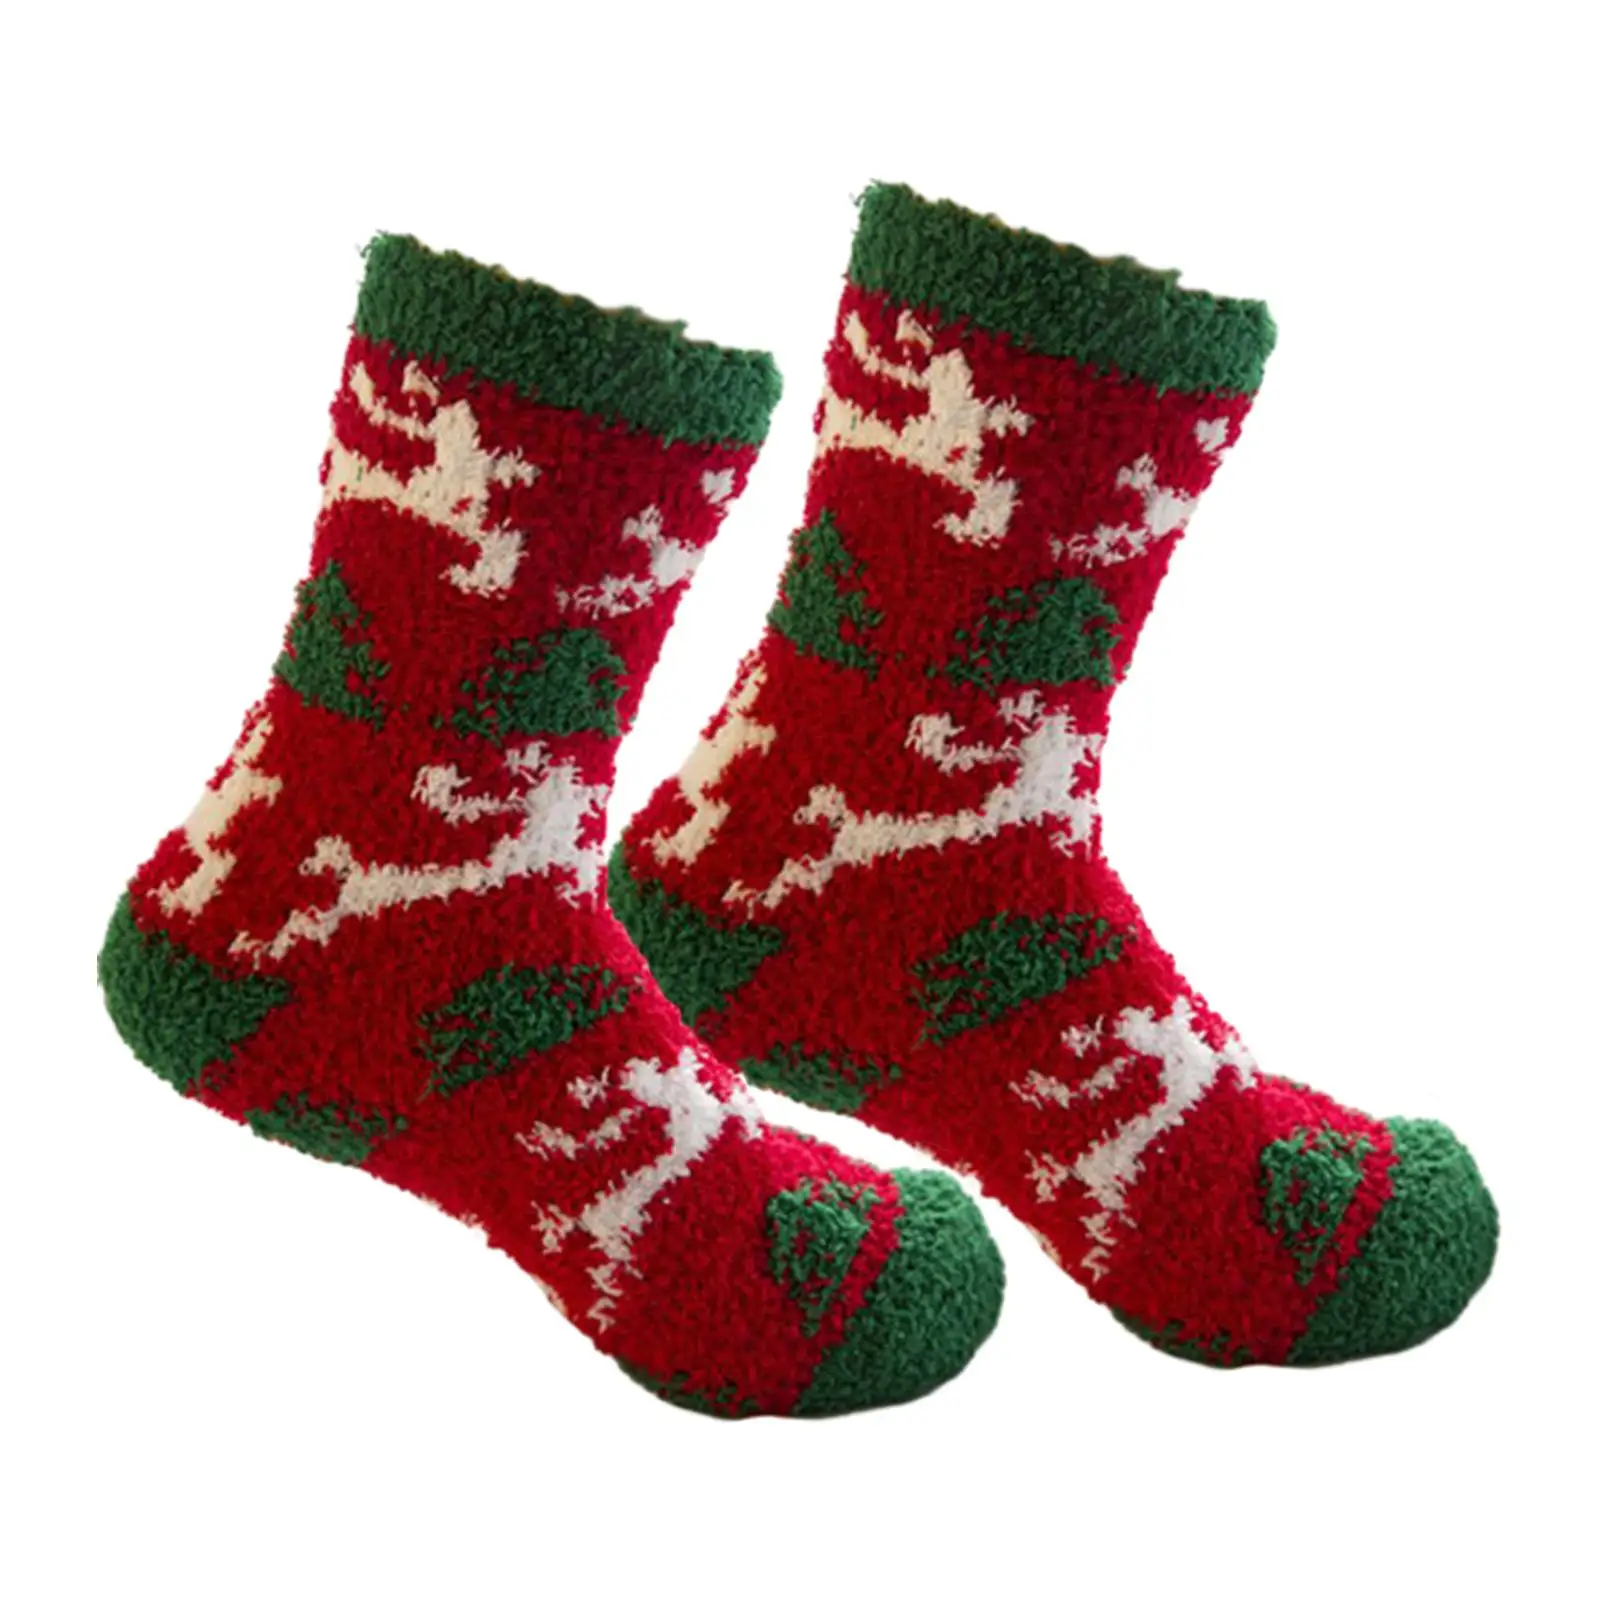 Christmas Fuzzy Socks for Women Girls Comfortable Thermal Cute Sleeping Socks for Party House Festive Bed Floor Home wearing